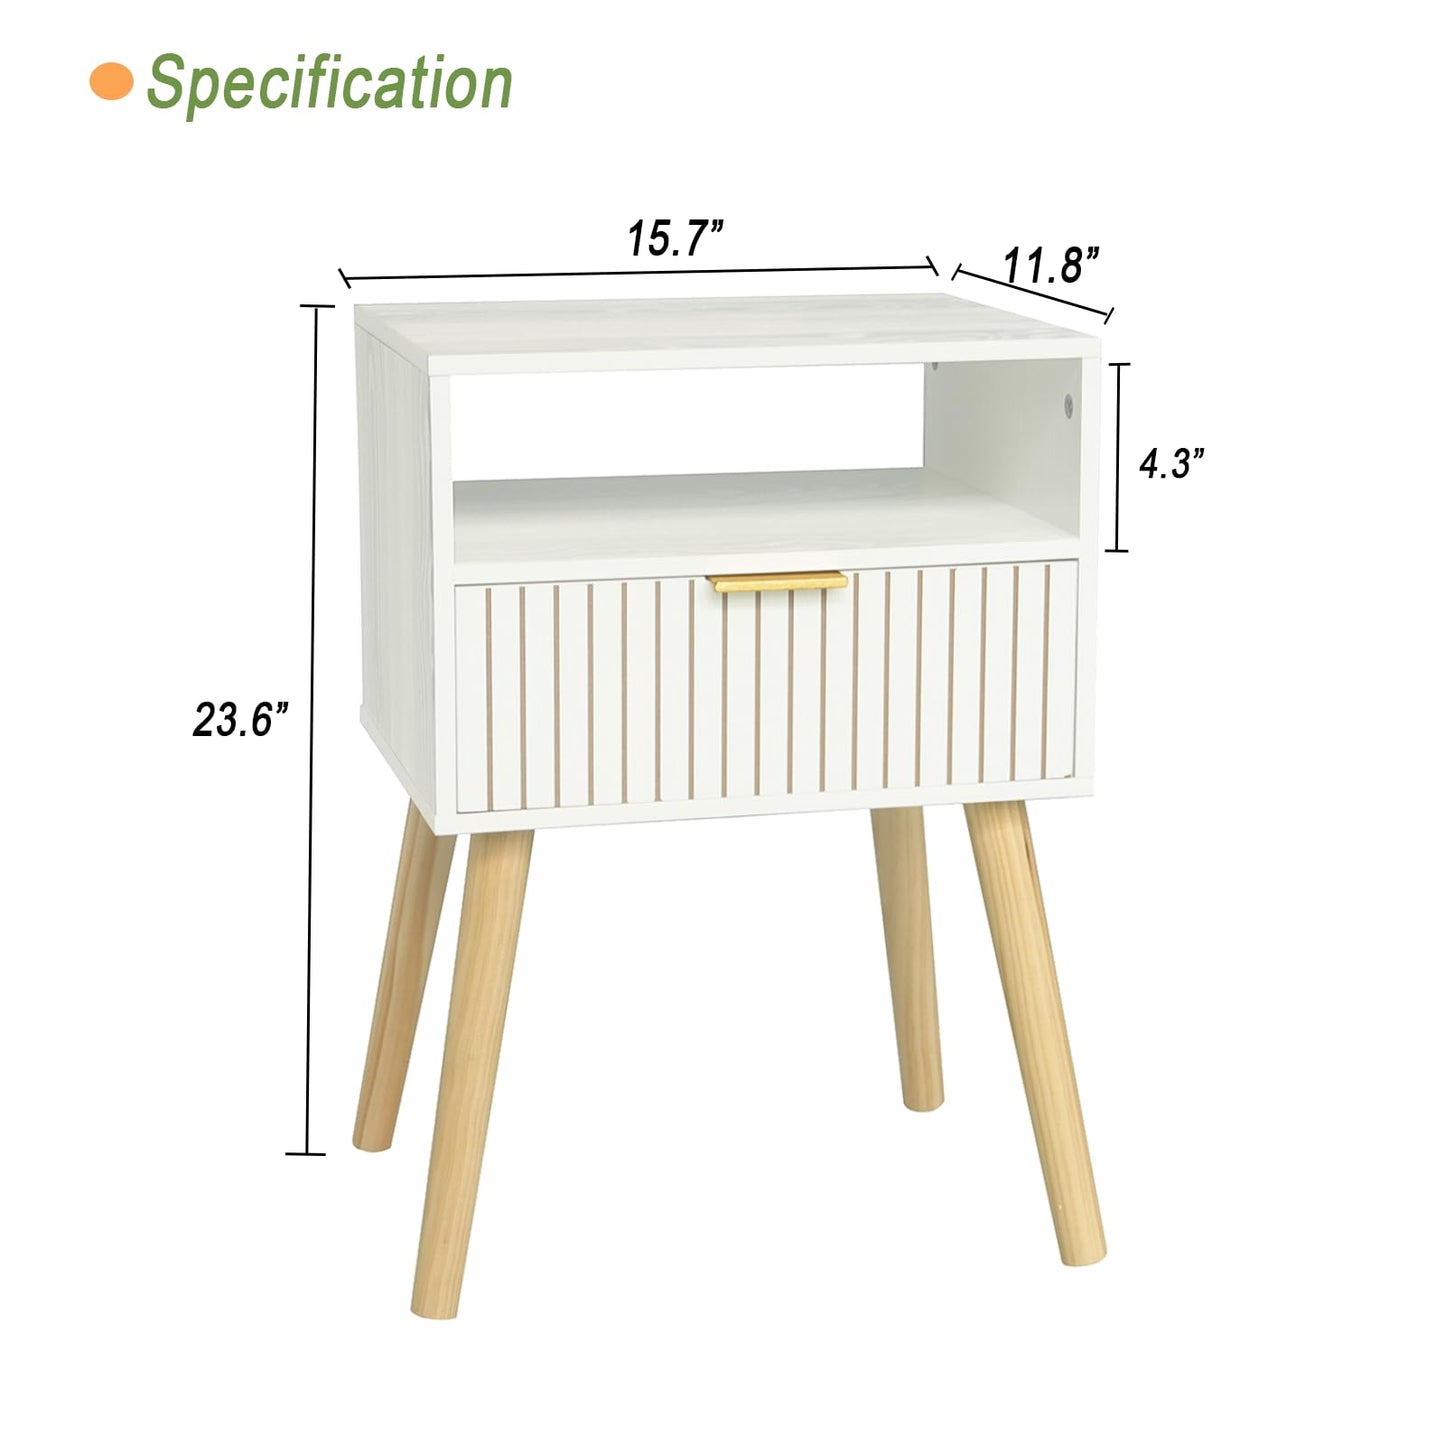 MaxSmeo White Nightstand, Mid Century Modern Nightstand, Small Bedside Table End Table for Bedroom with 2-Tier Storage, White